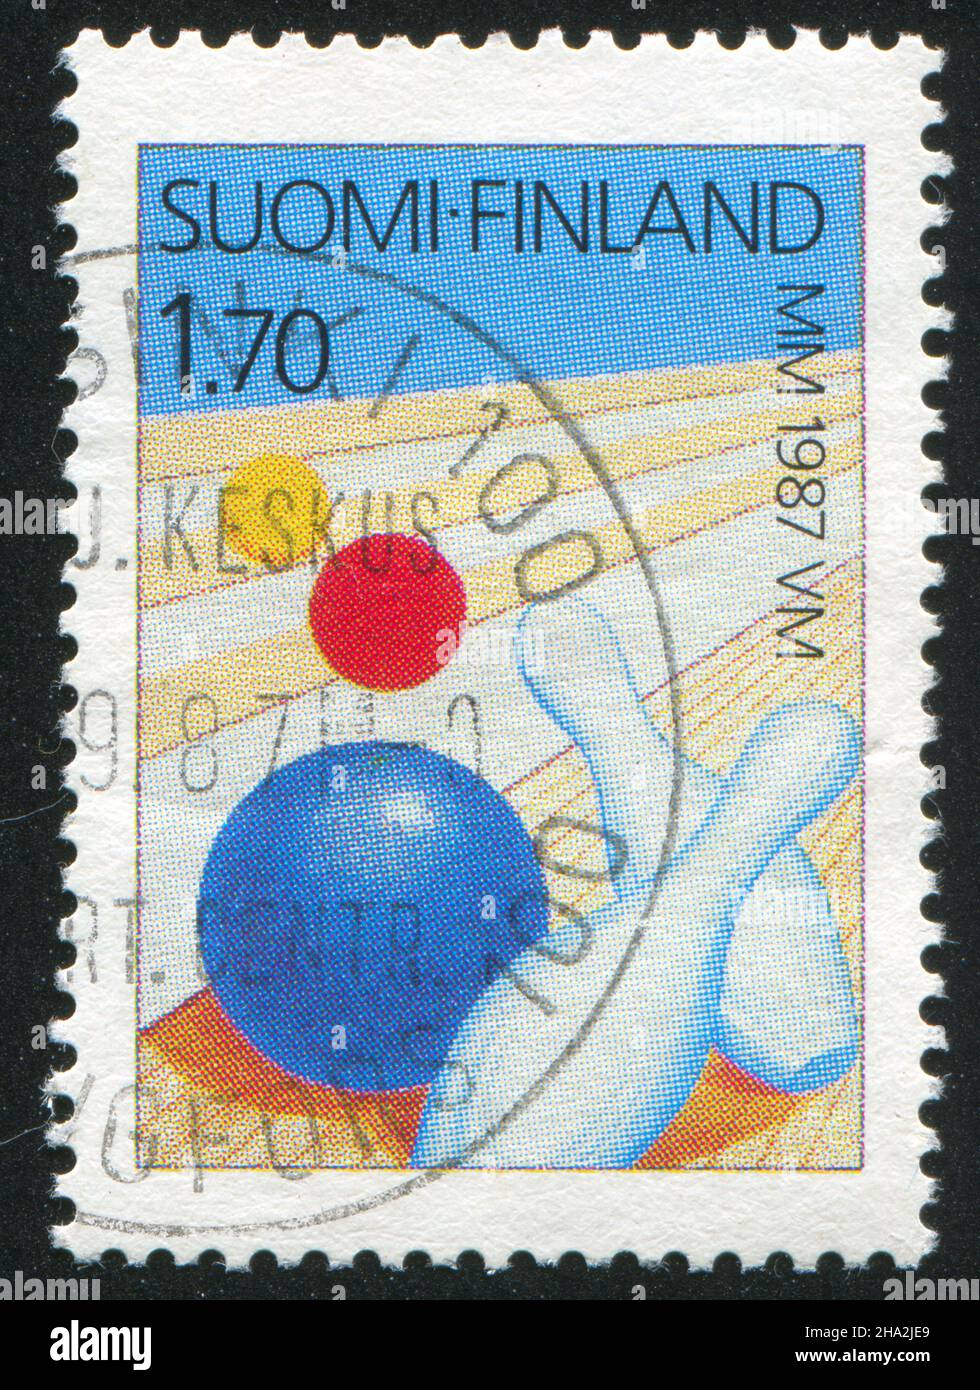 FINLAND - CIRCA 1987: stamp printed by Finland, shows Bowling Alley, Ball and Pins, circa 1987 Stock Photo